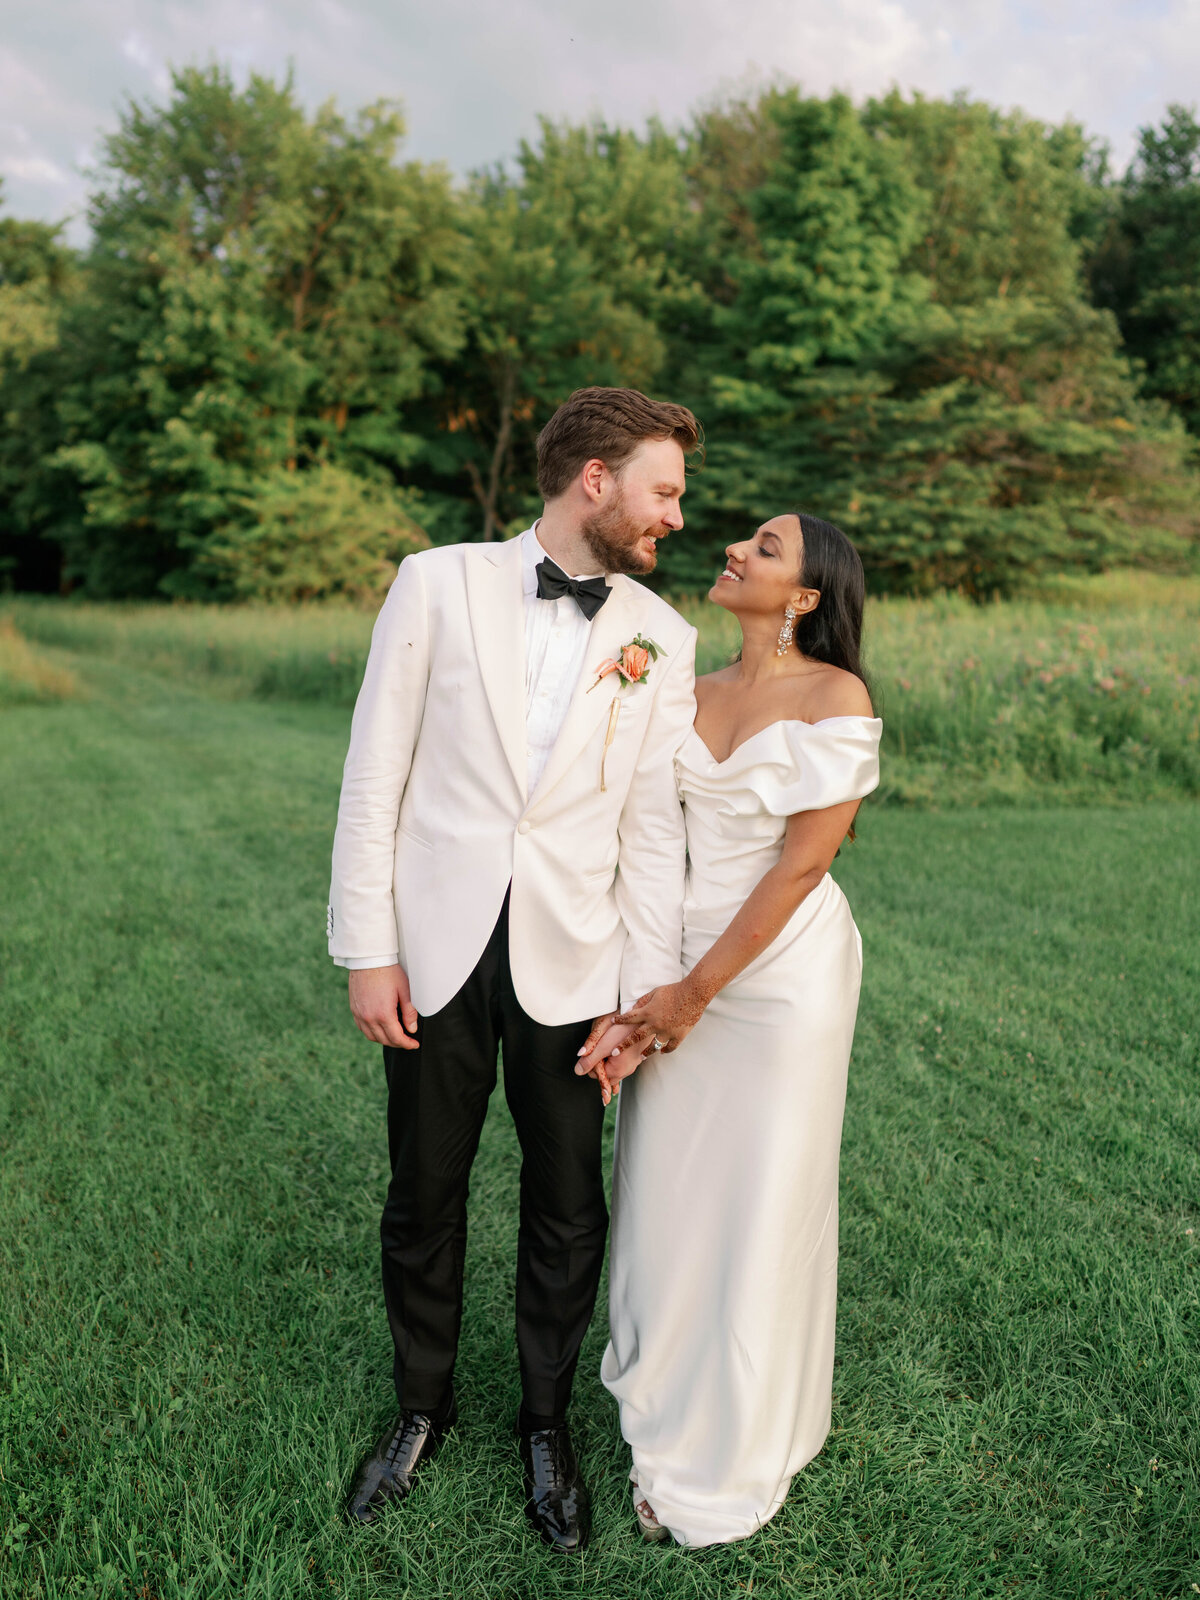 Liz Andolina Photography Destination Wedding Photographer in Italy, New York, Across the East Coast Editorial, heritage-quality images for stylish couples-806